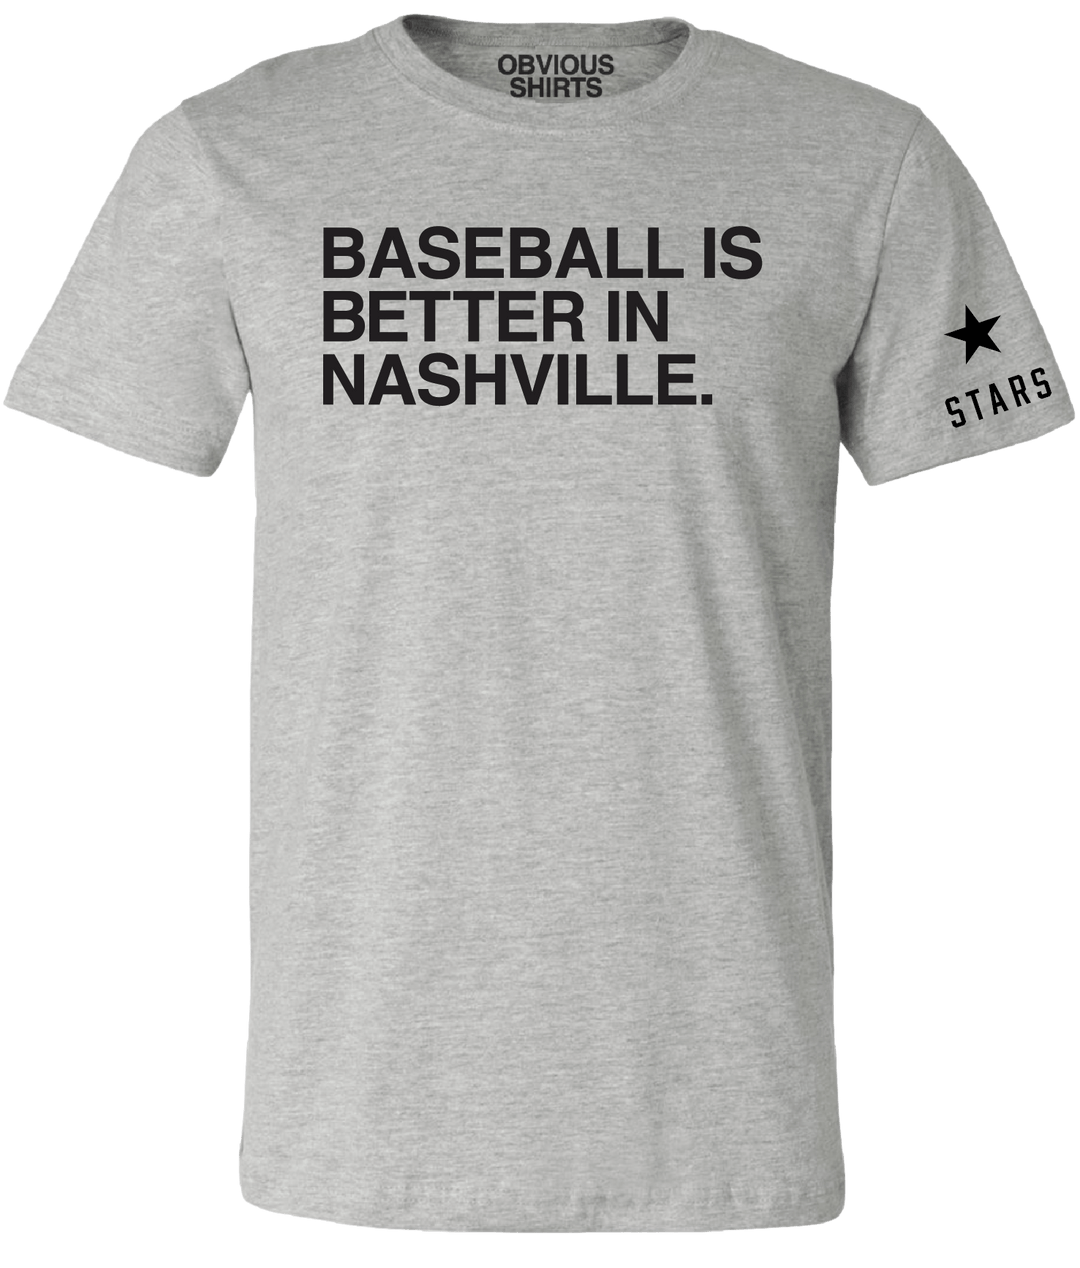 BASEBALL IS BETTER IN NASHVILLE. (GREY) - OBVIOUS SHIRTS